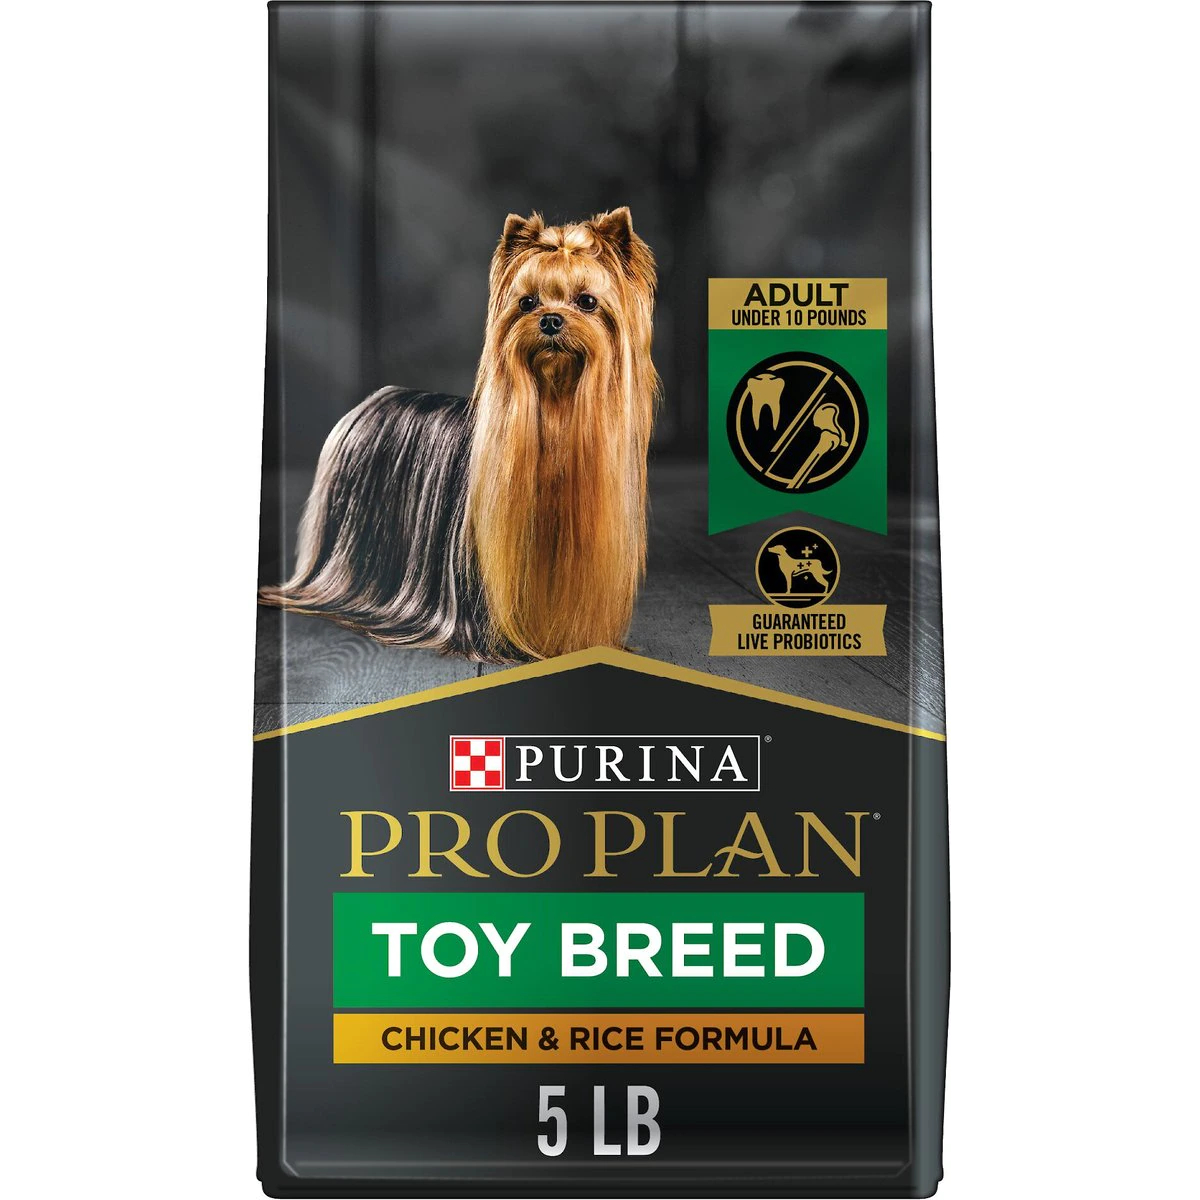 Purina Pro Plan Adult Toy Breed Chicken & Rice Formula Dry Dog Food 